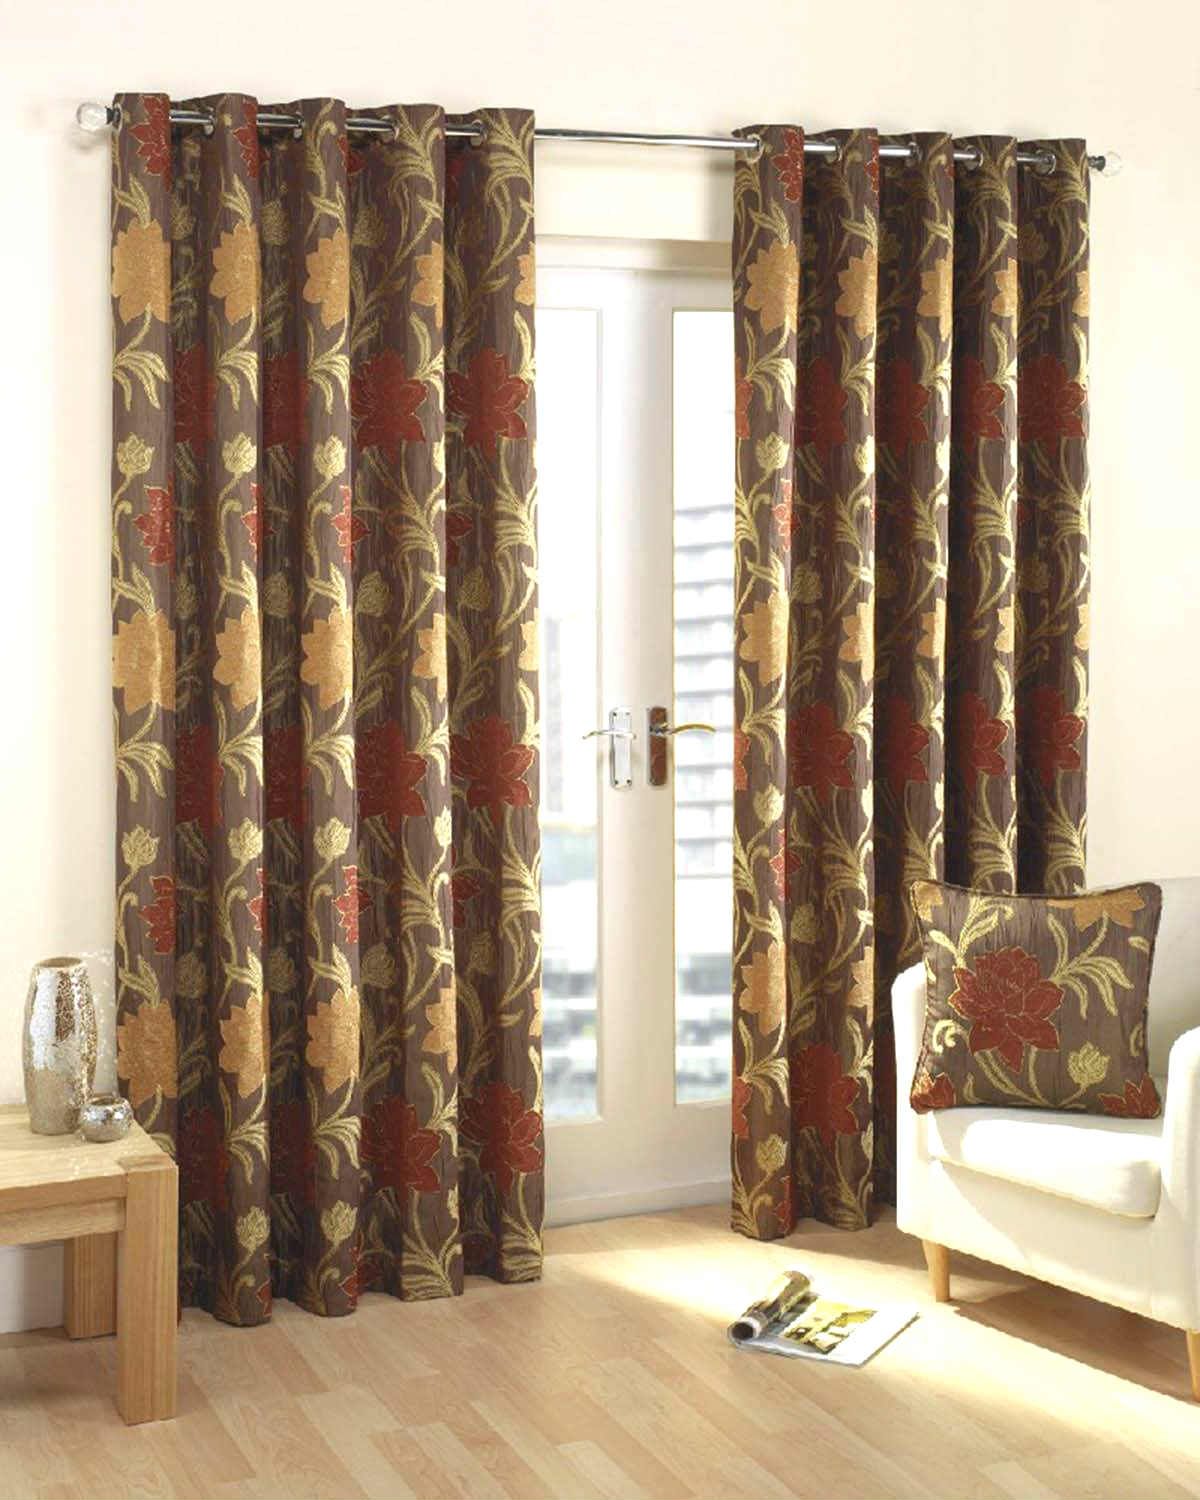 Verdi Lined Eyelet Curtains Rust Free Uk Delivery Terrys Fabrics Inside Brown Eyelet Curtains (View 14 of 25)